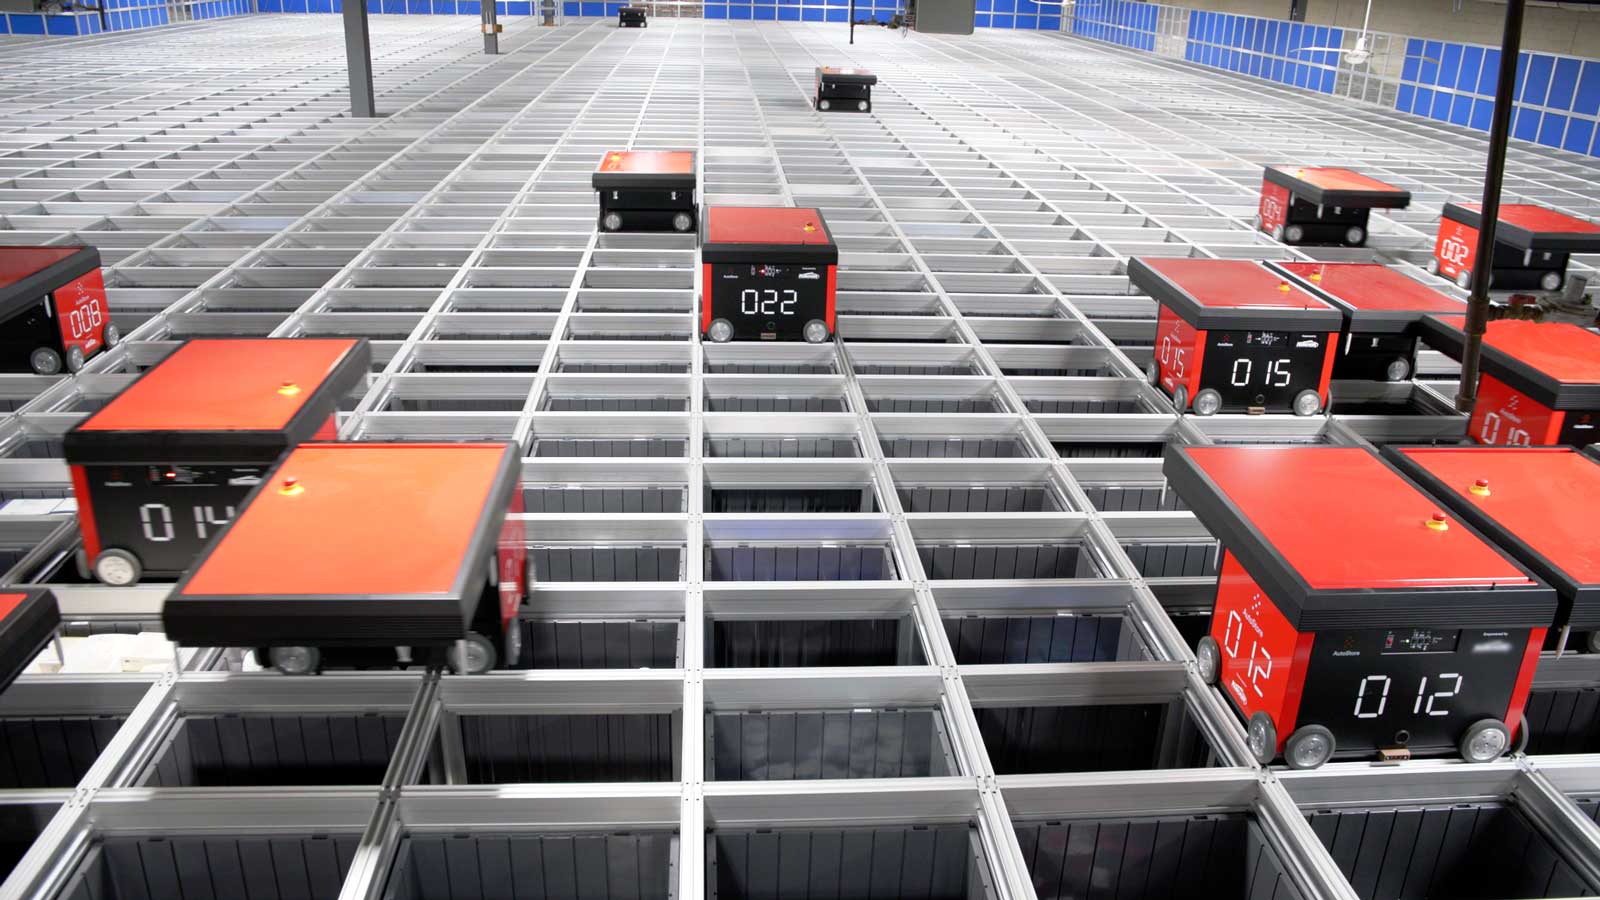 AutoStore AS/RS in 3PL warehouse